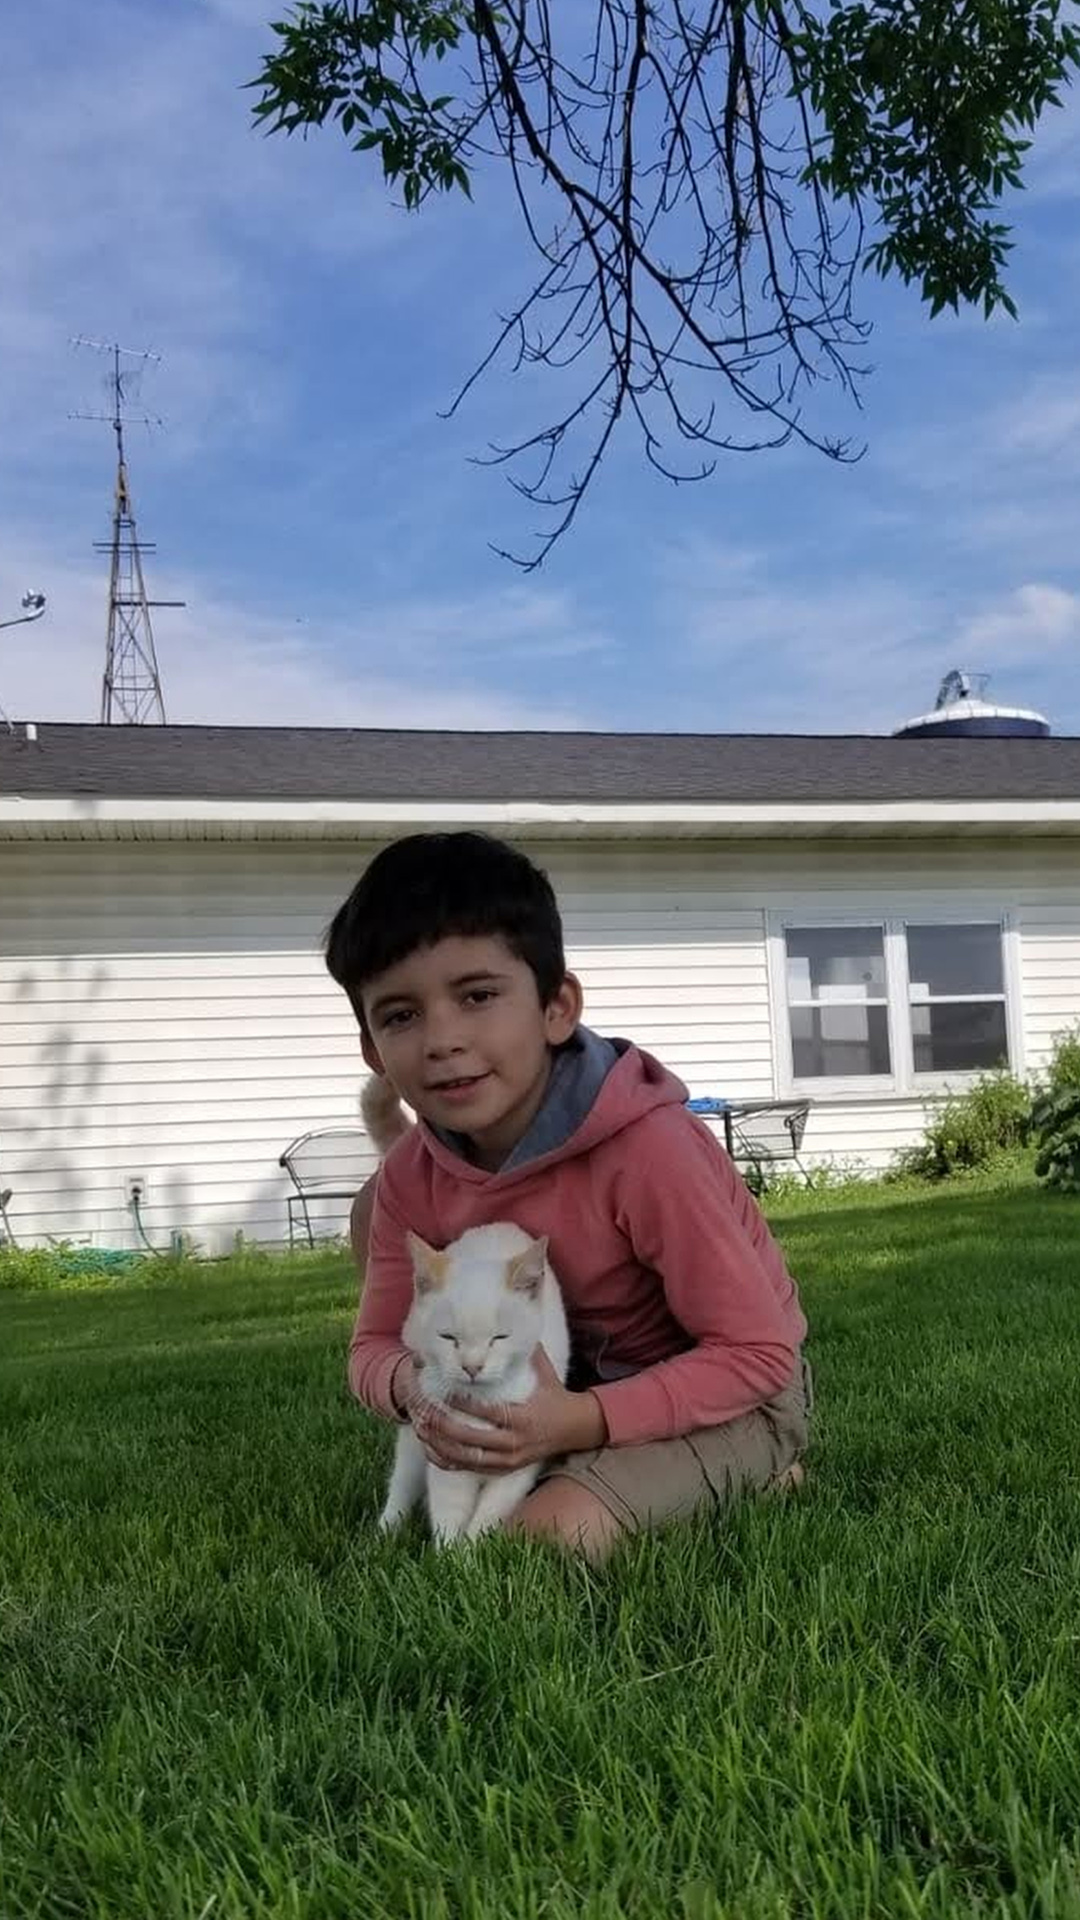 Jefferson Rodríguez sits on a lawn while holding a cat, with a single-story building with a window, radio tower and silo in the background.